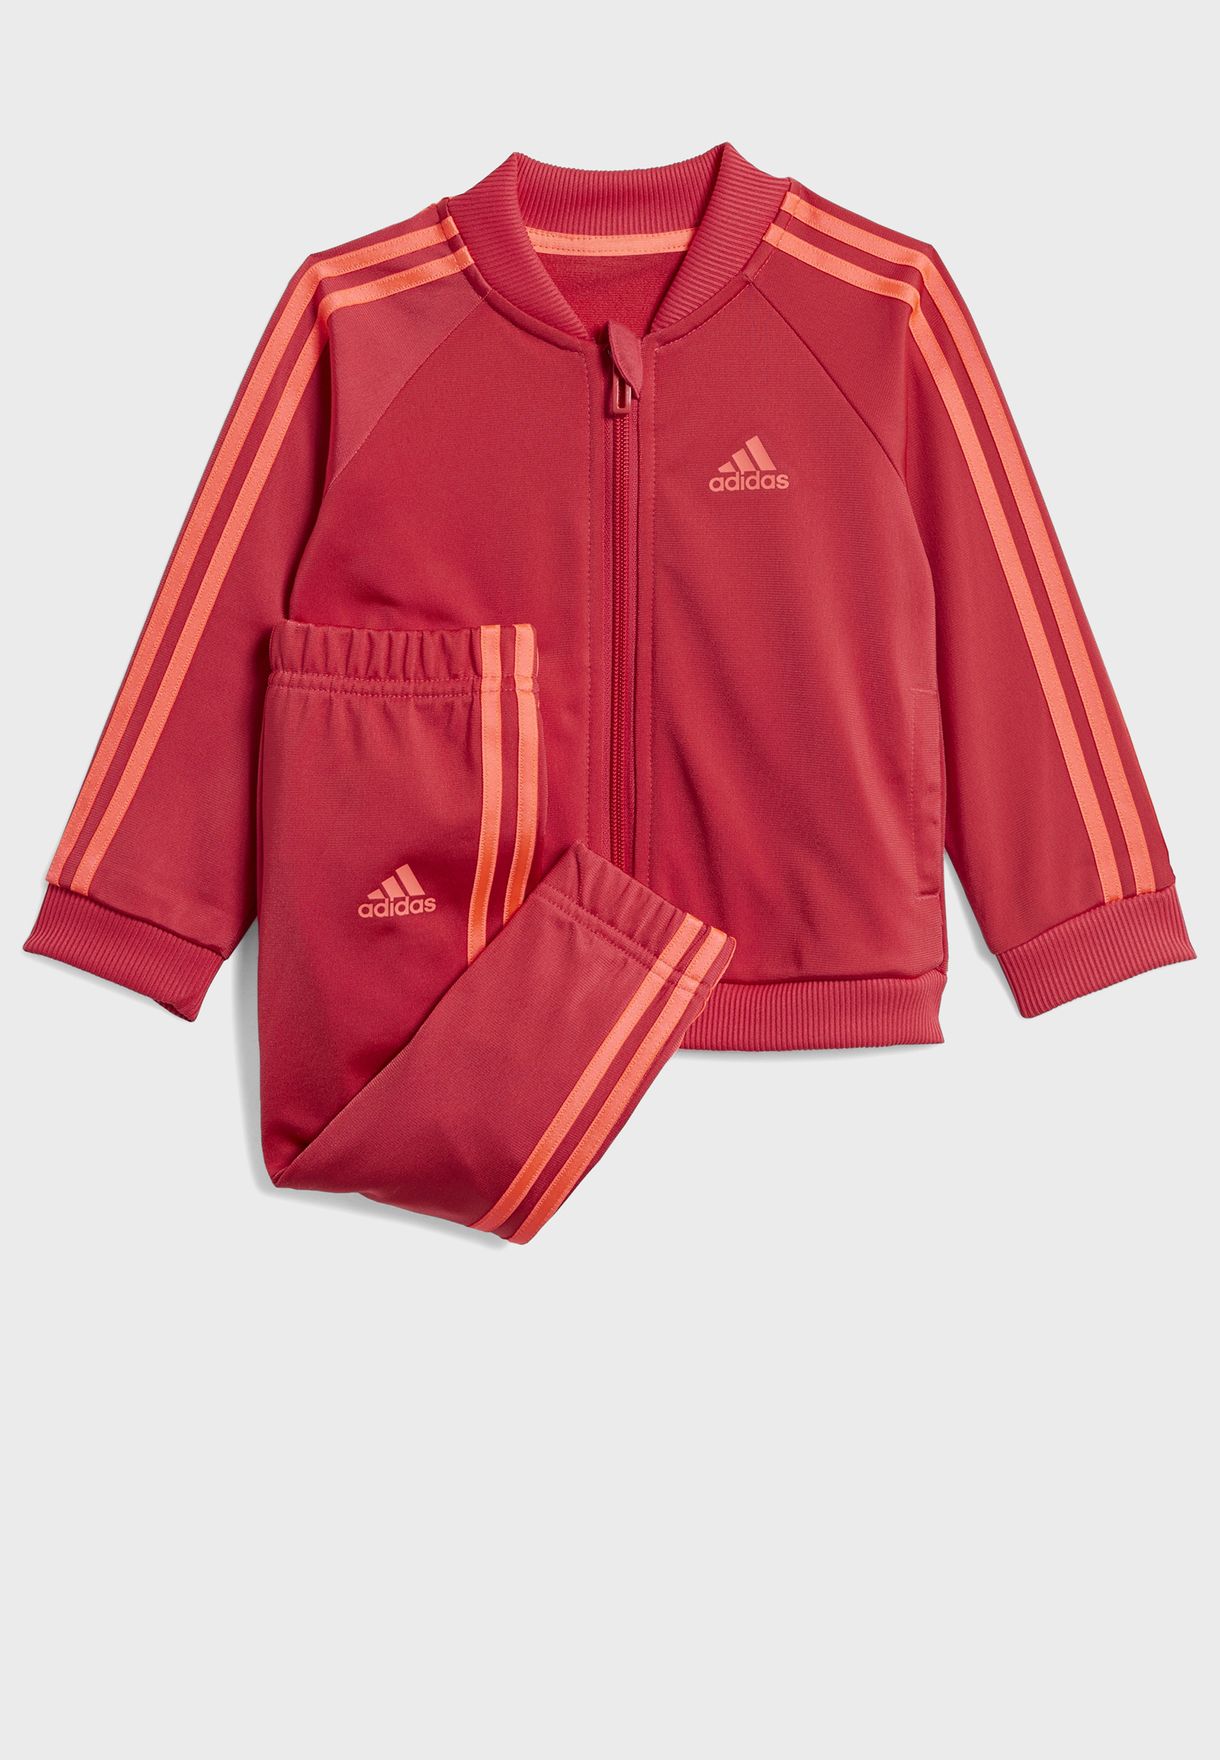 red infant adidas tracksuit